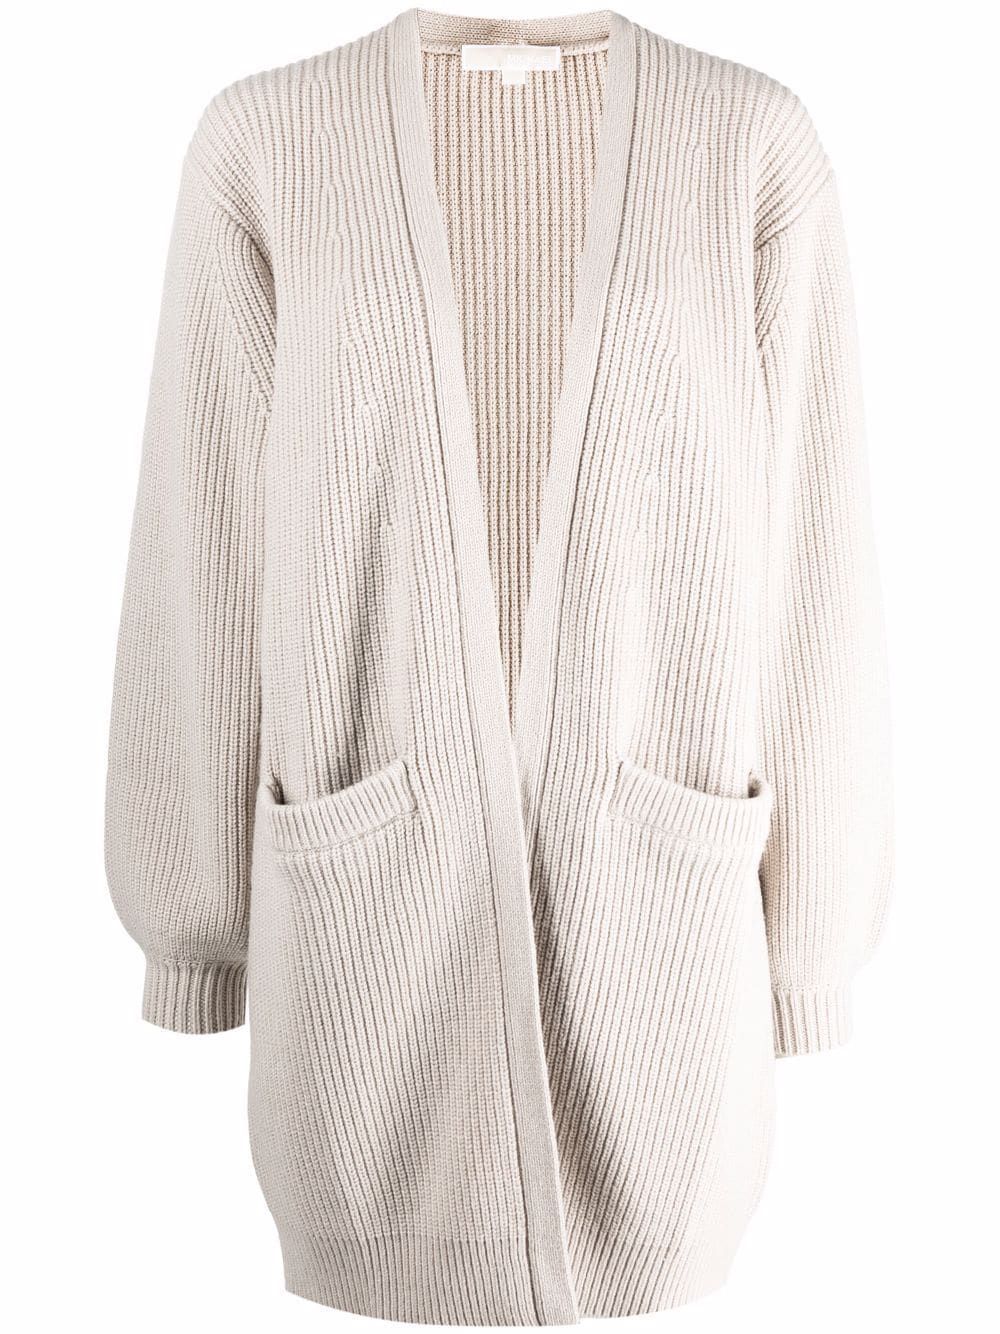 MICHAEL KORS RIBBED KNITTED WITH PUFF-SLEEVE ΖΑΚΕΤΑ